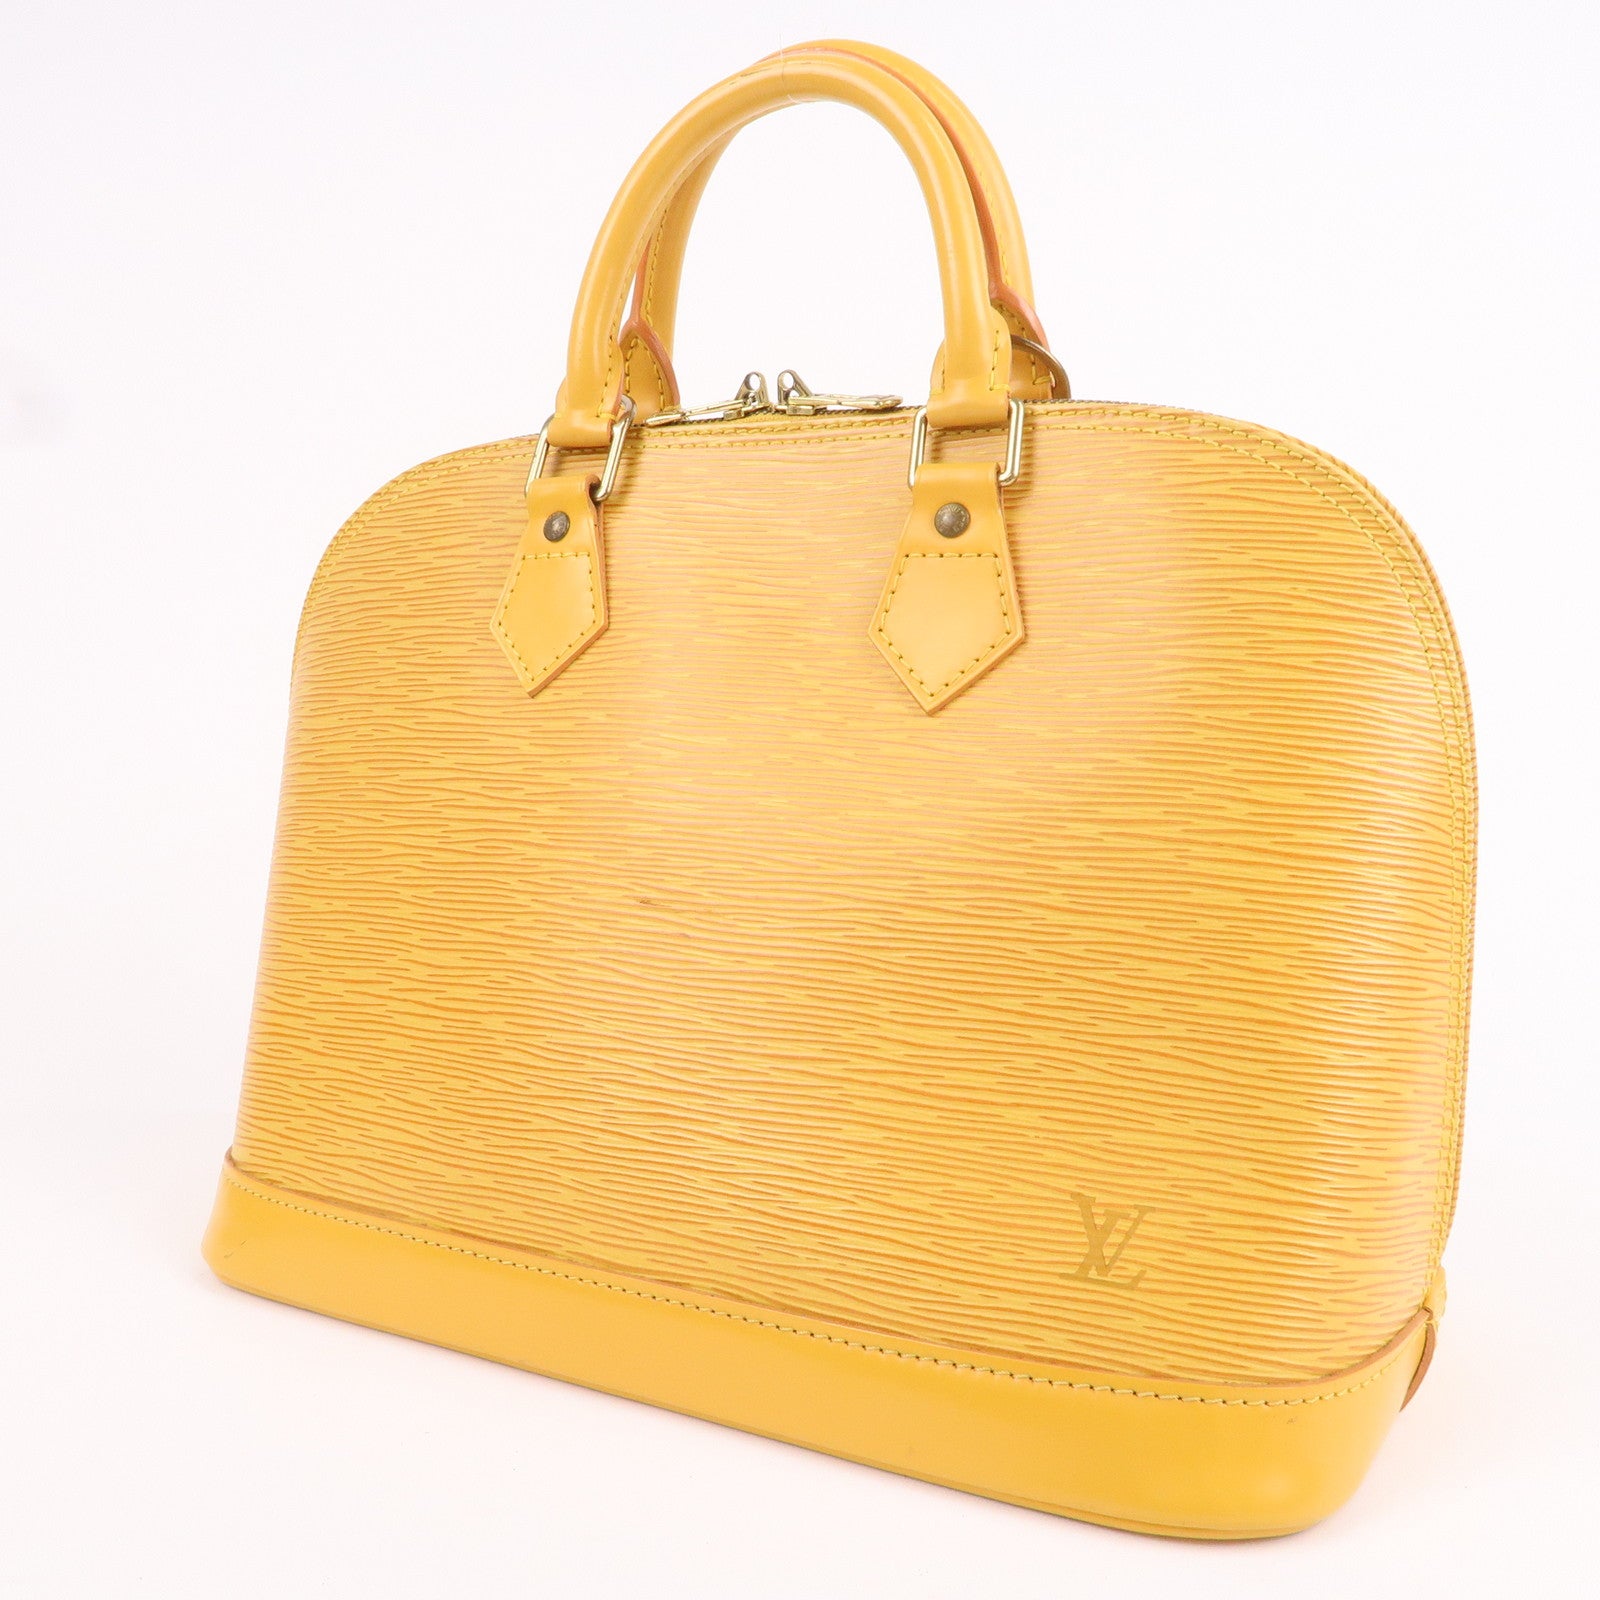 Buy Free Shipping Authentic Pre-owned Louis Vuitton Epi Tassili